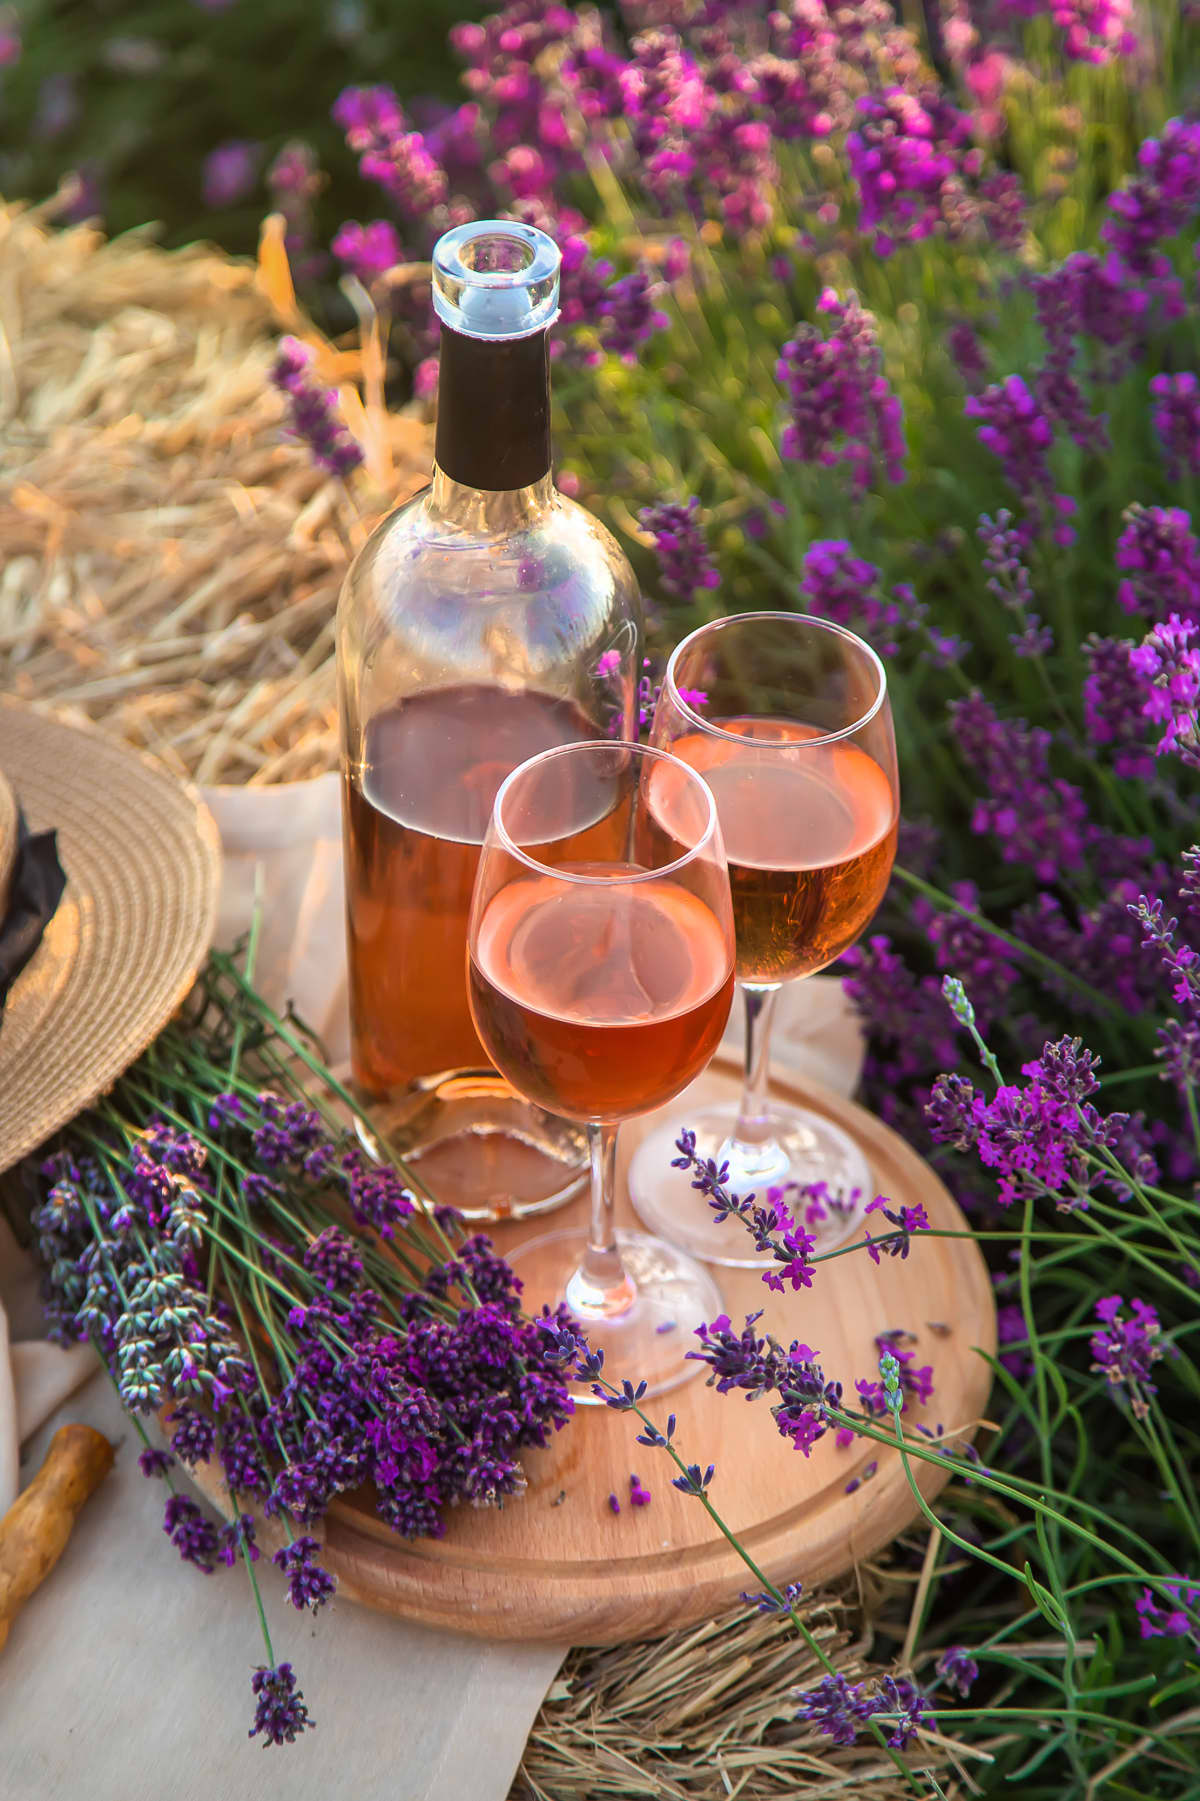 Pink wine bottle and two glasses in a field of lavenders